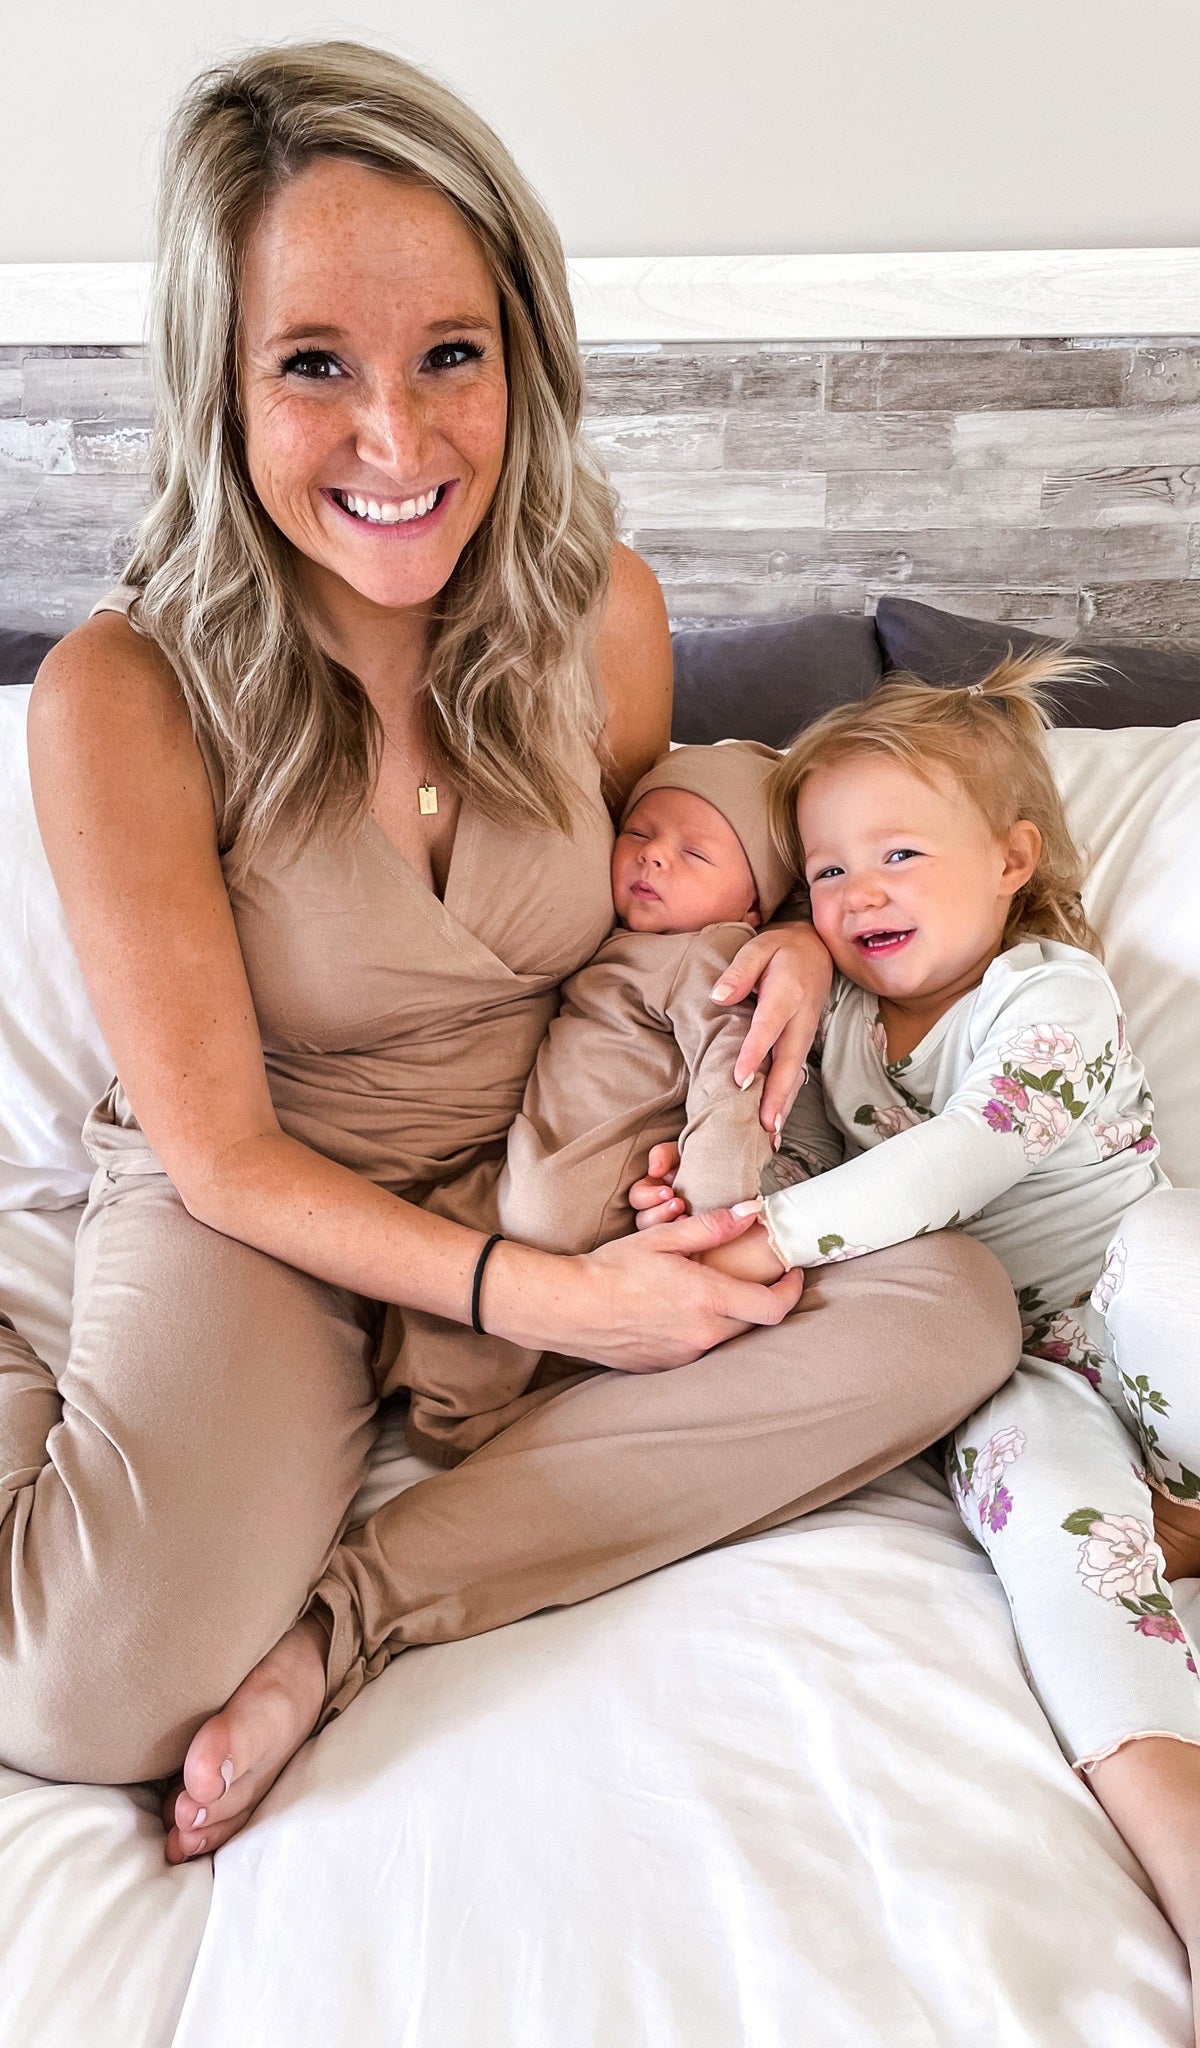 Latte Gown 2-Piece with long sleeve baby gown and matching knotted hat worn by sleeping baby while being hugged by his mom and sister..